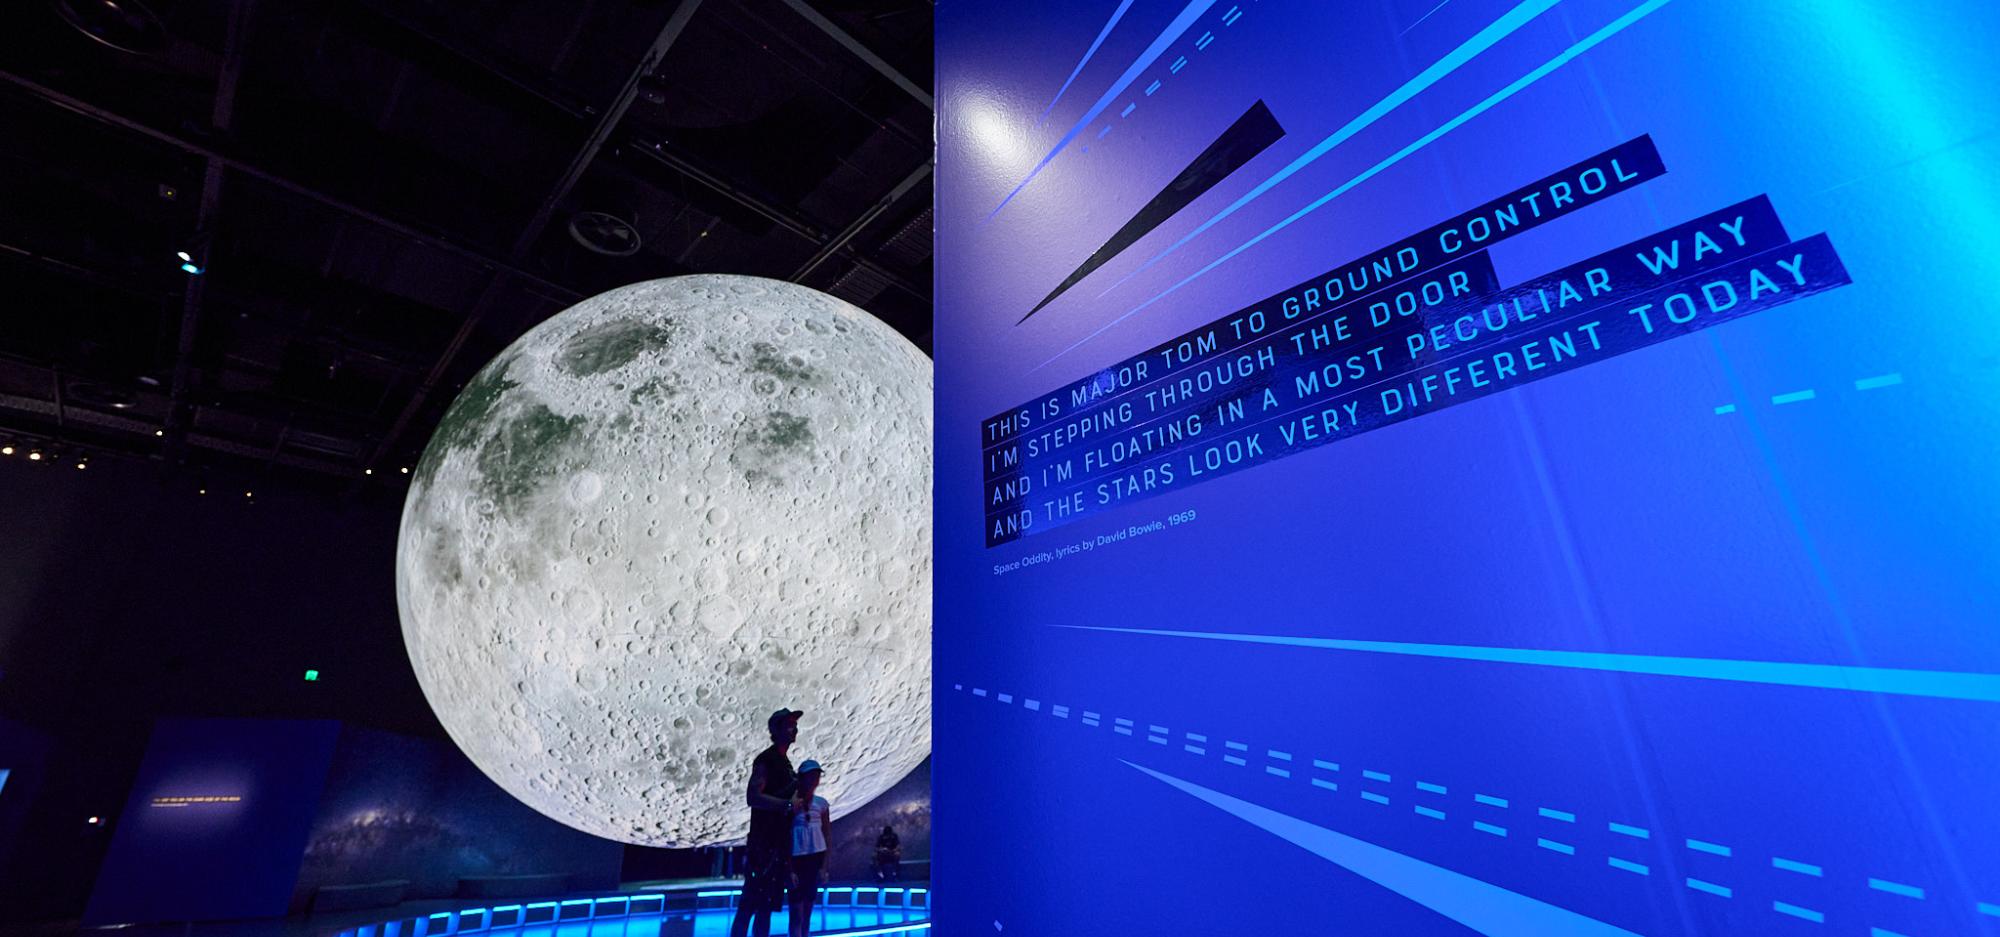 A dramatically lit large moon sculpture hangs in a dark gallery partially obstructed by a wall bathed in blue light with the lyrics to David Bowie's Space Oddity in black and white text